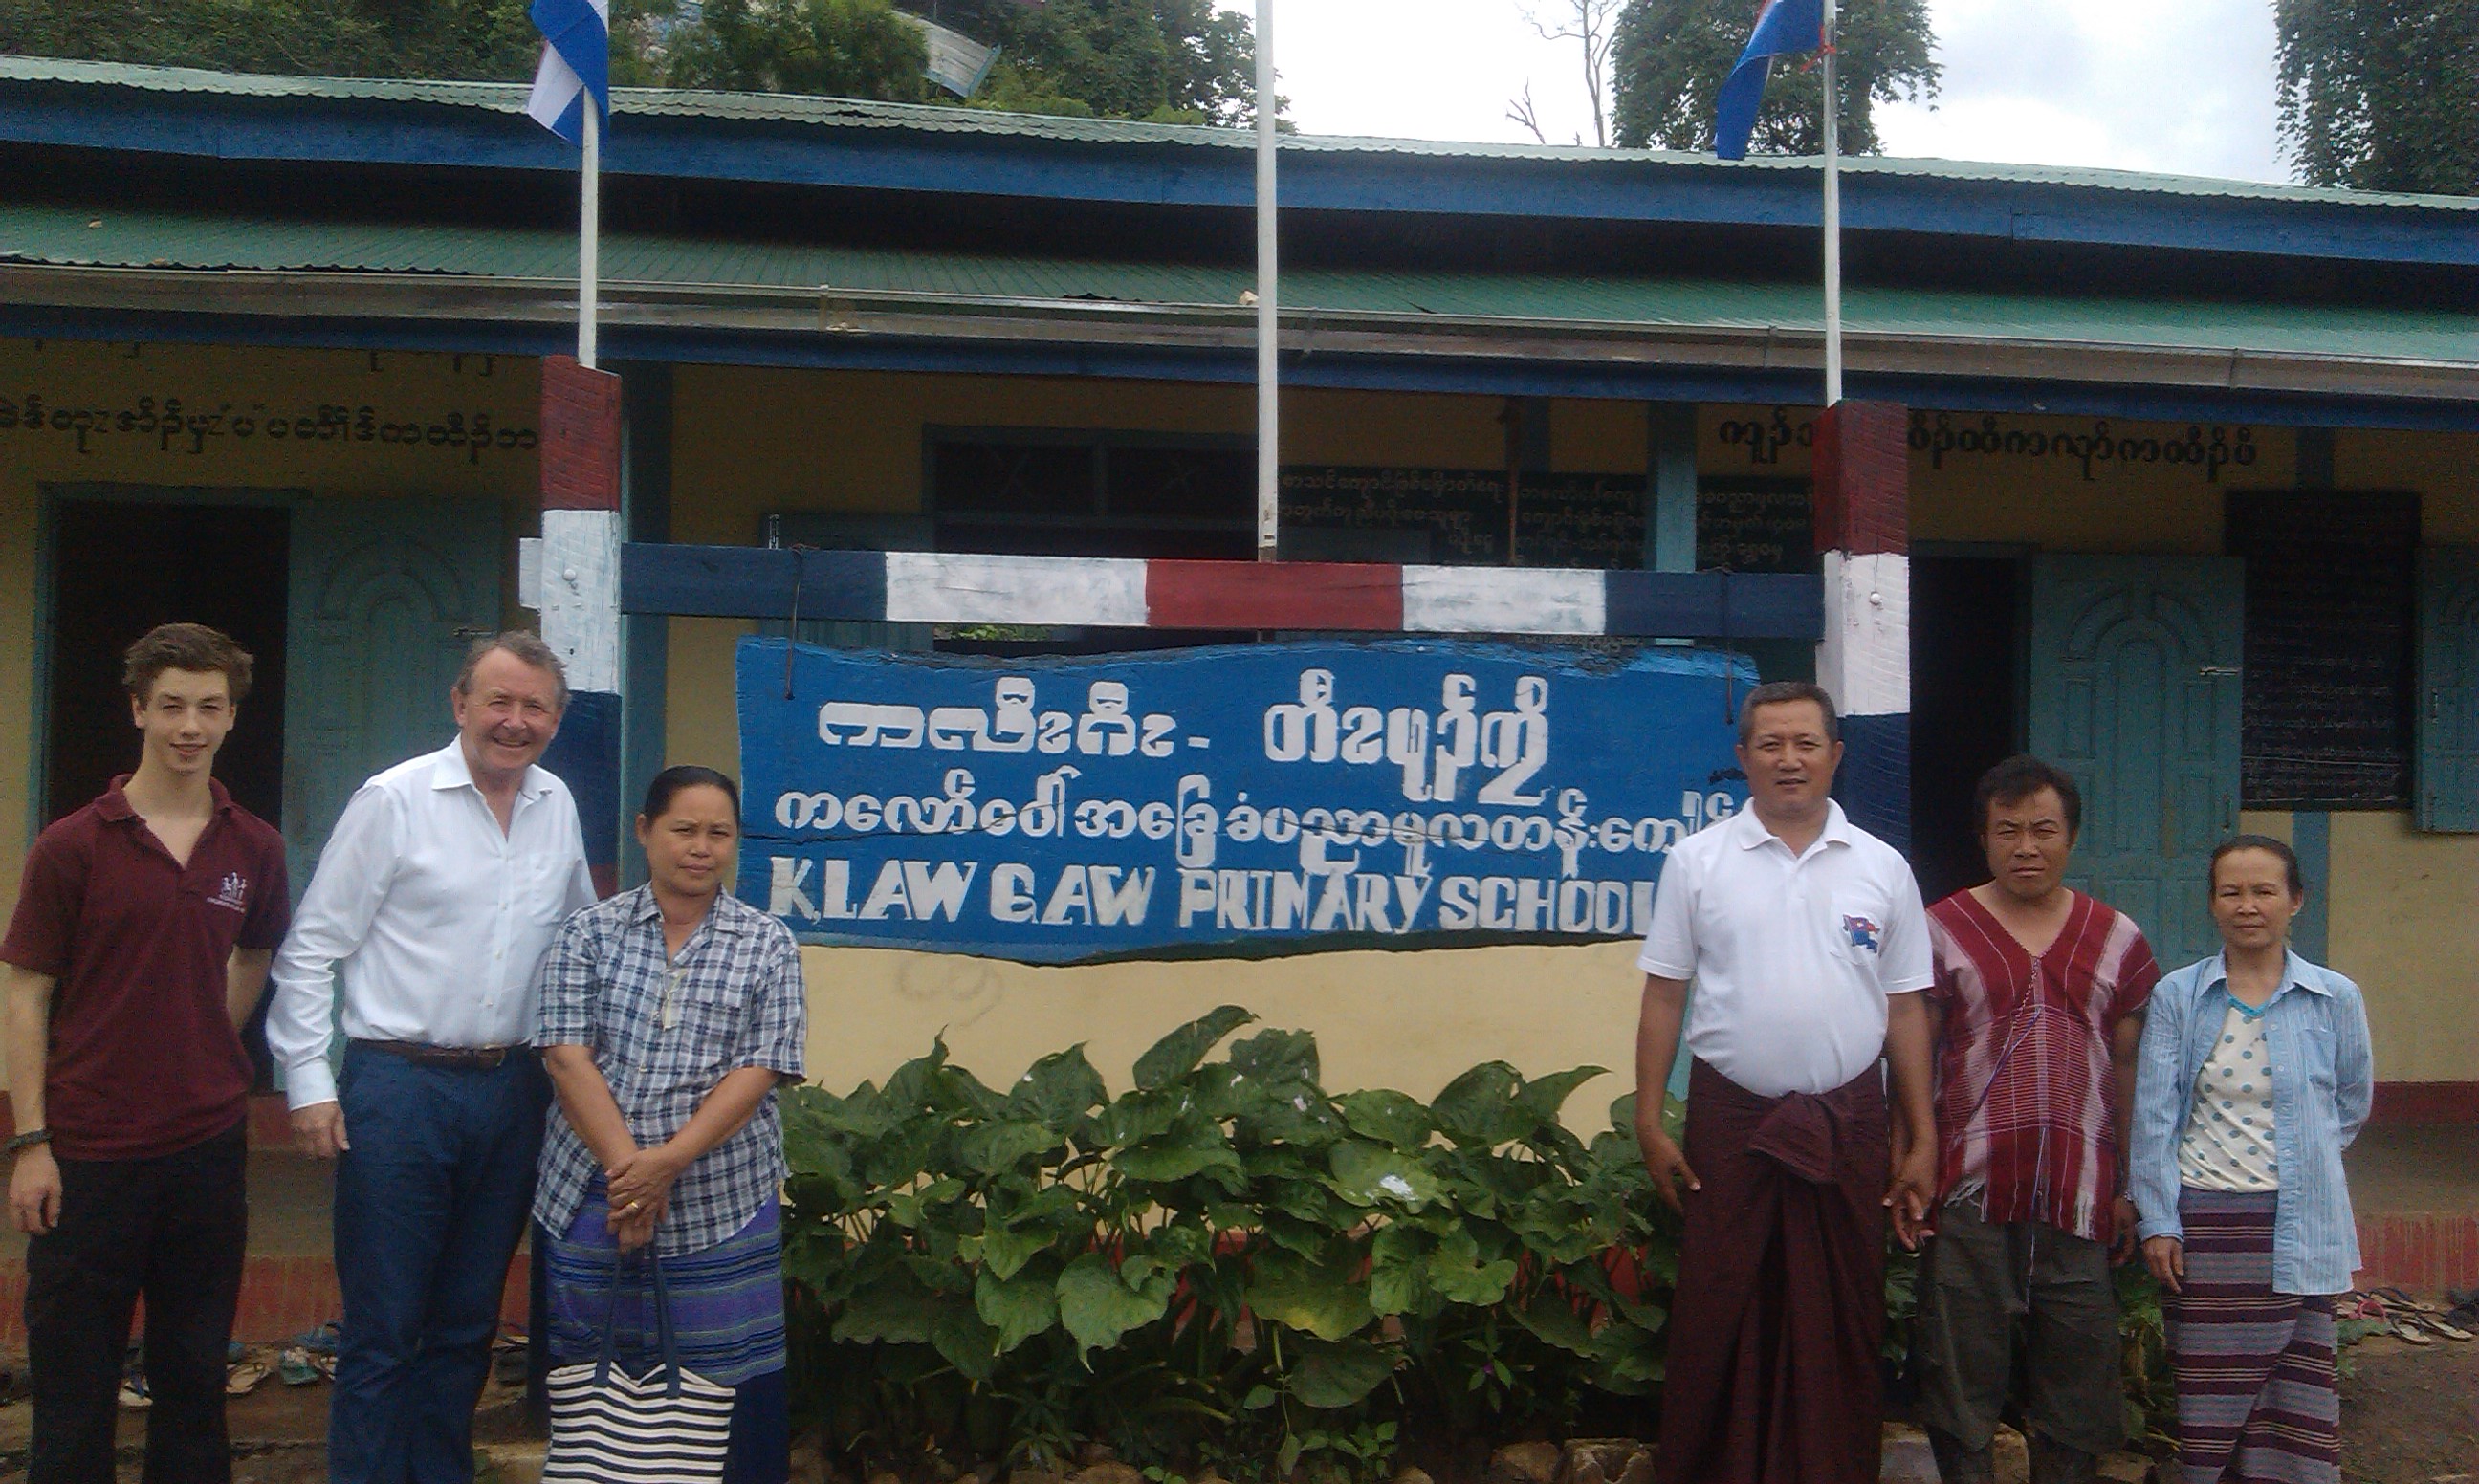 Pk' Law Gaw School - Supported by UK Charity The Epiphany Trust 